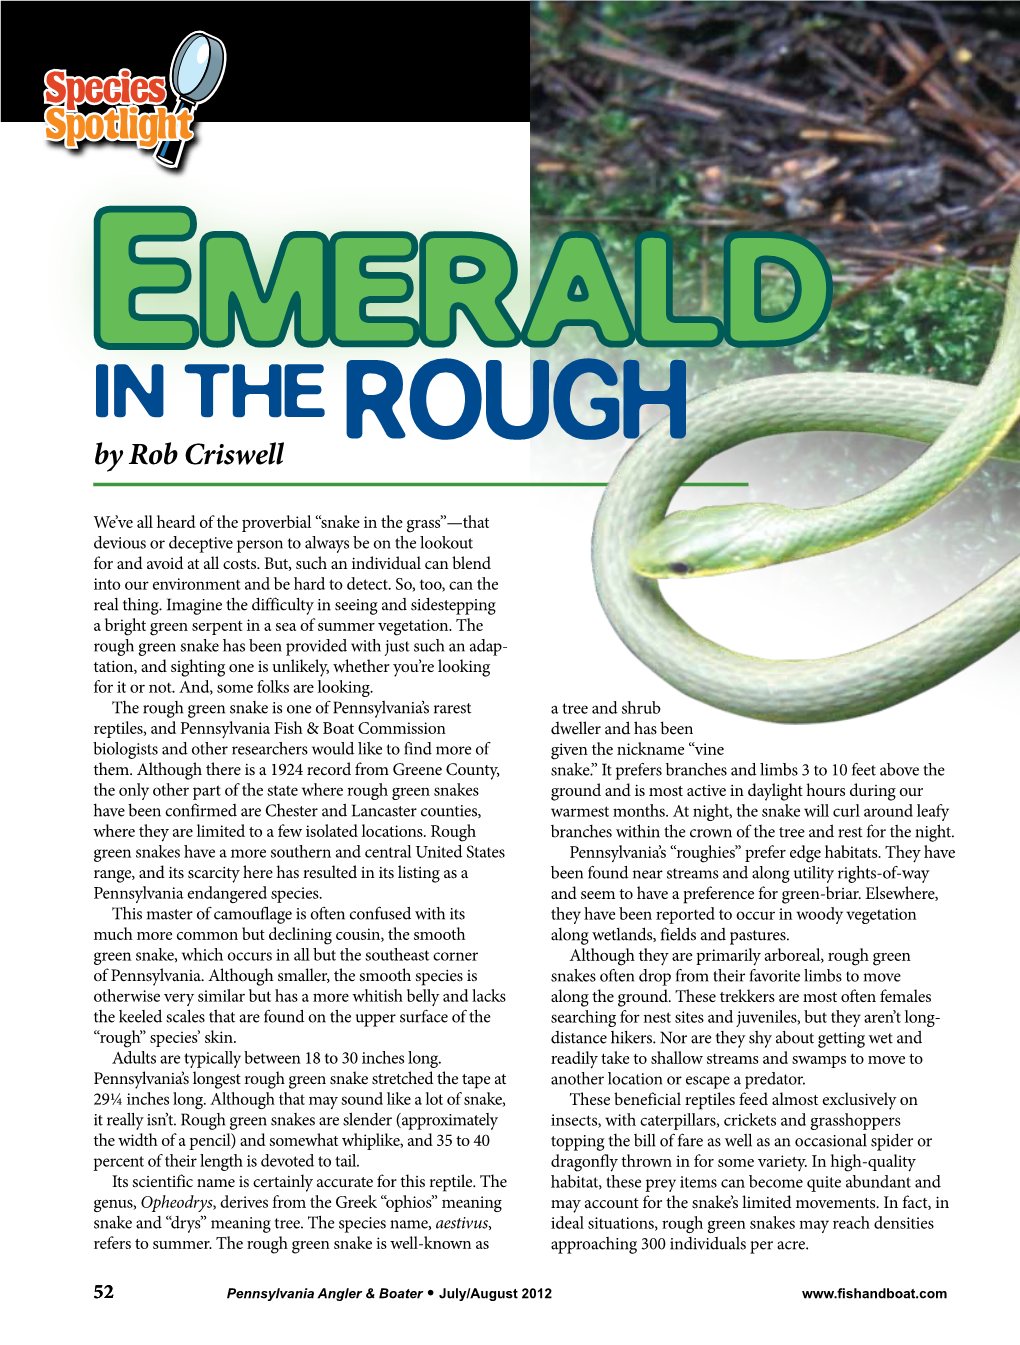 Emerald in the Rough by Rob Criswell